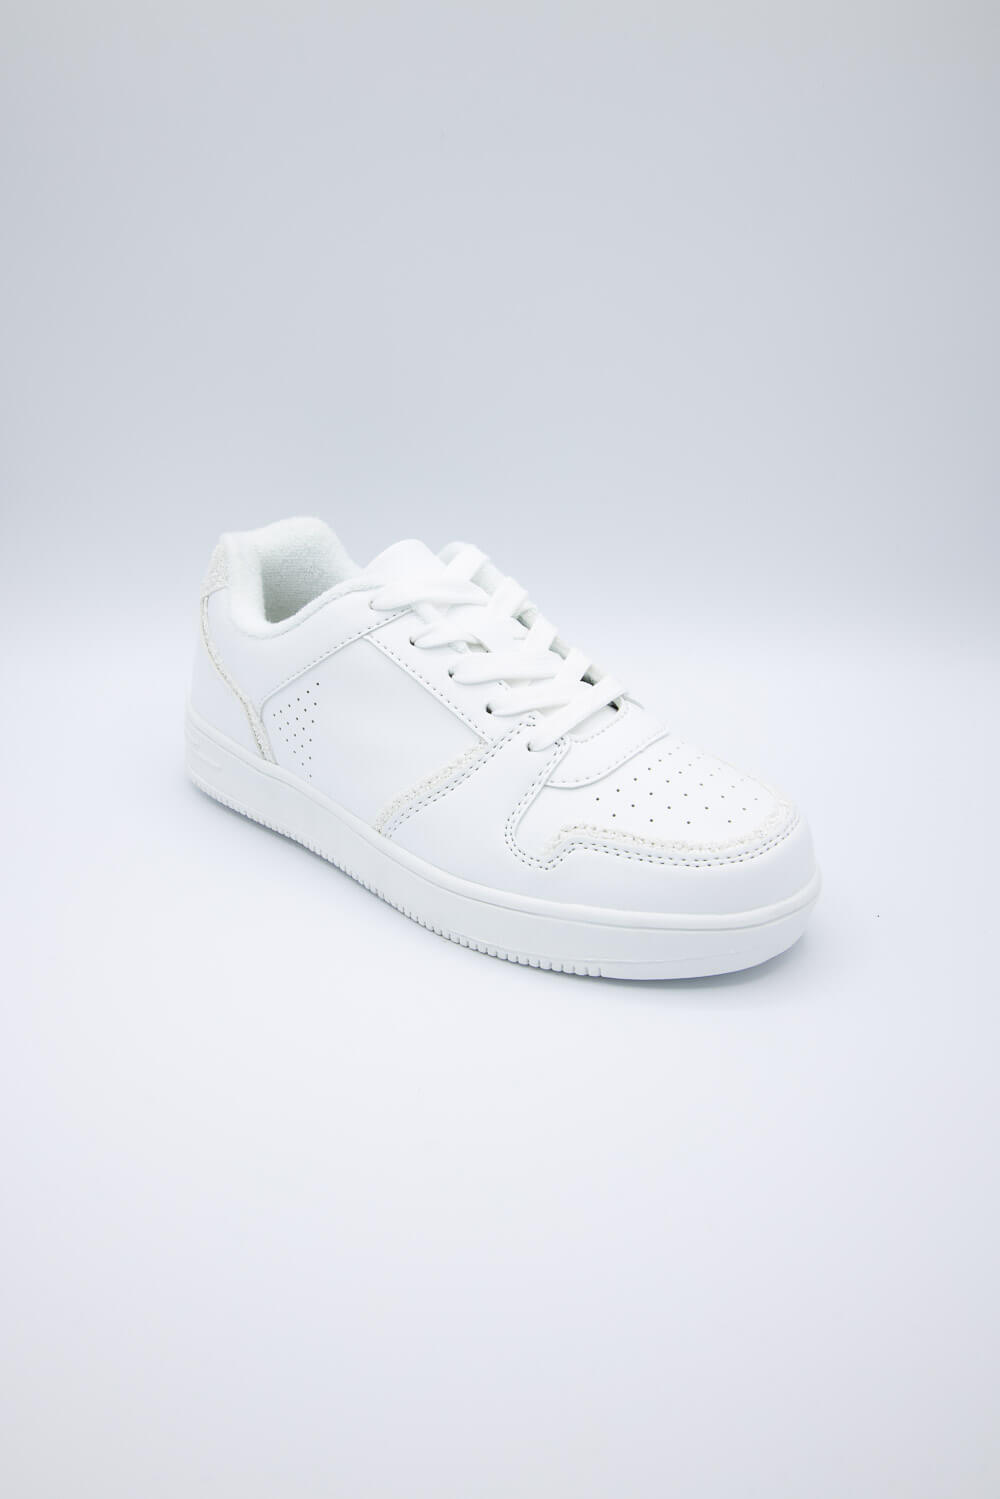 Update more than 100 hrx white sneakers shoes best